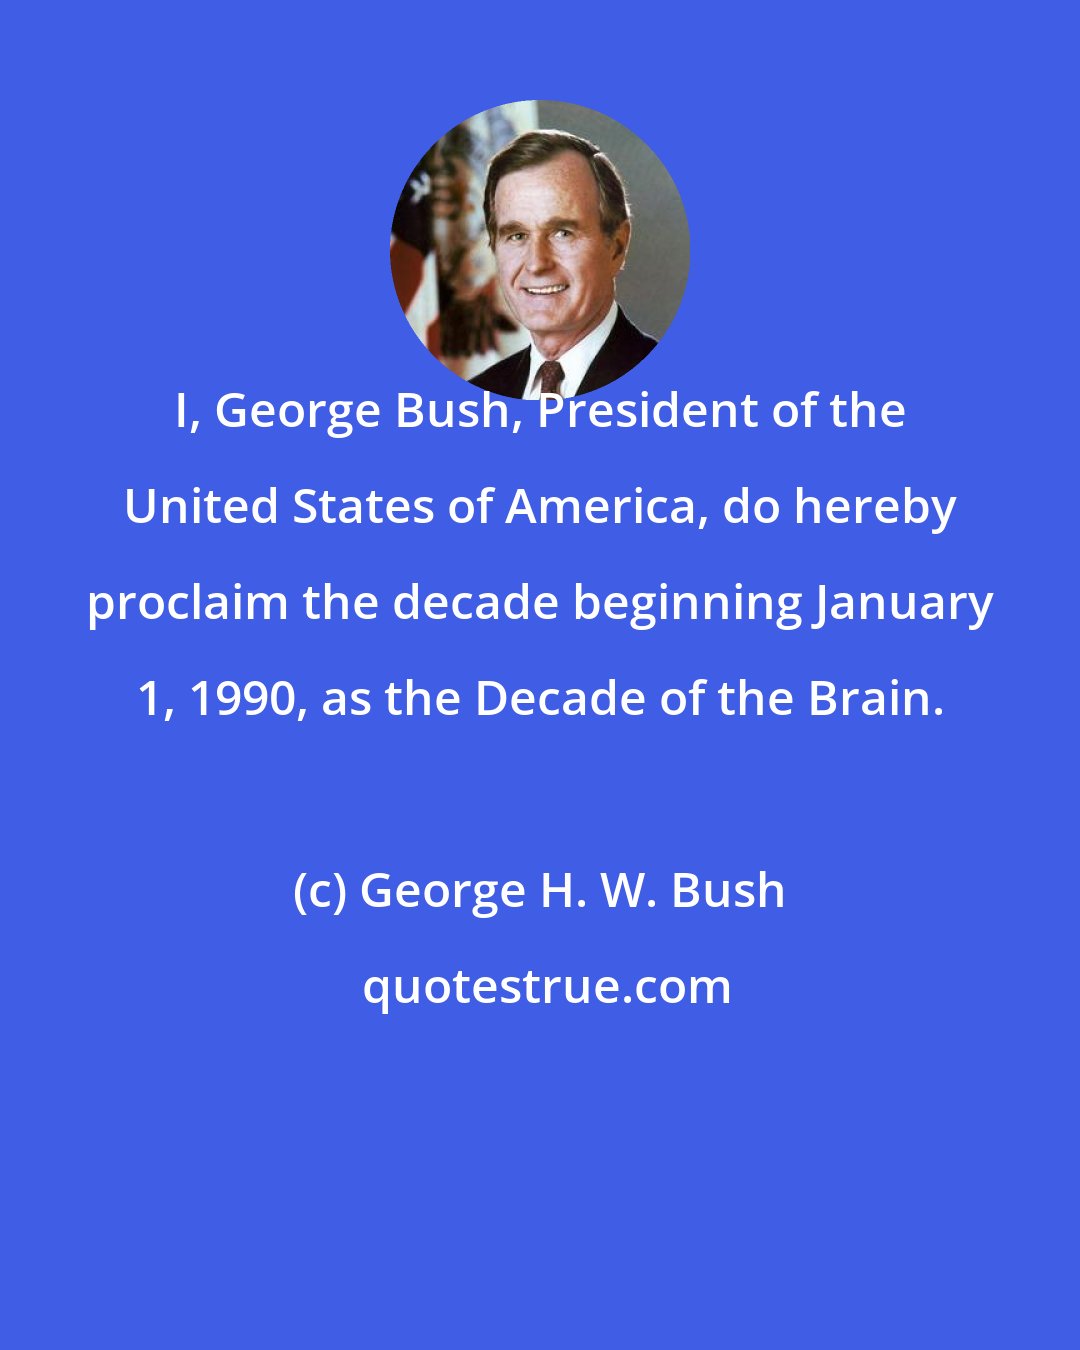 George H. W. Bush: I, George Bush, President of the United States of America, do hereby proclaim the decade beginning January 1, 1990, as the Decade of the Brain.